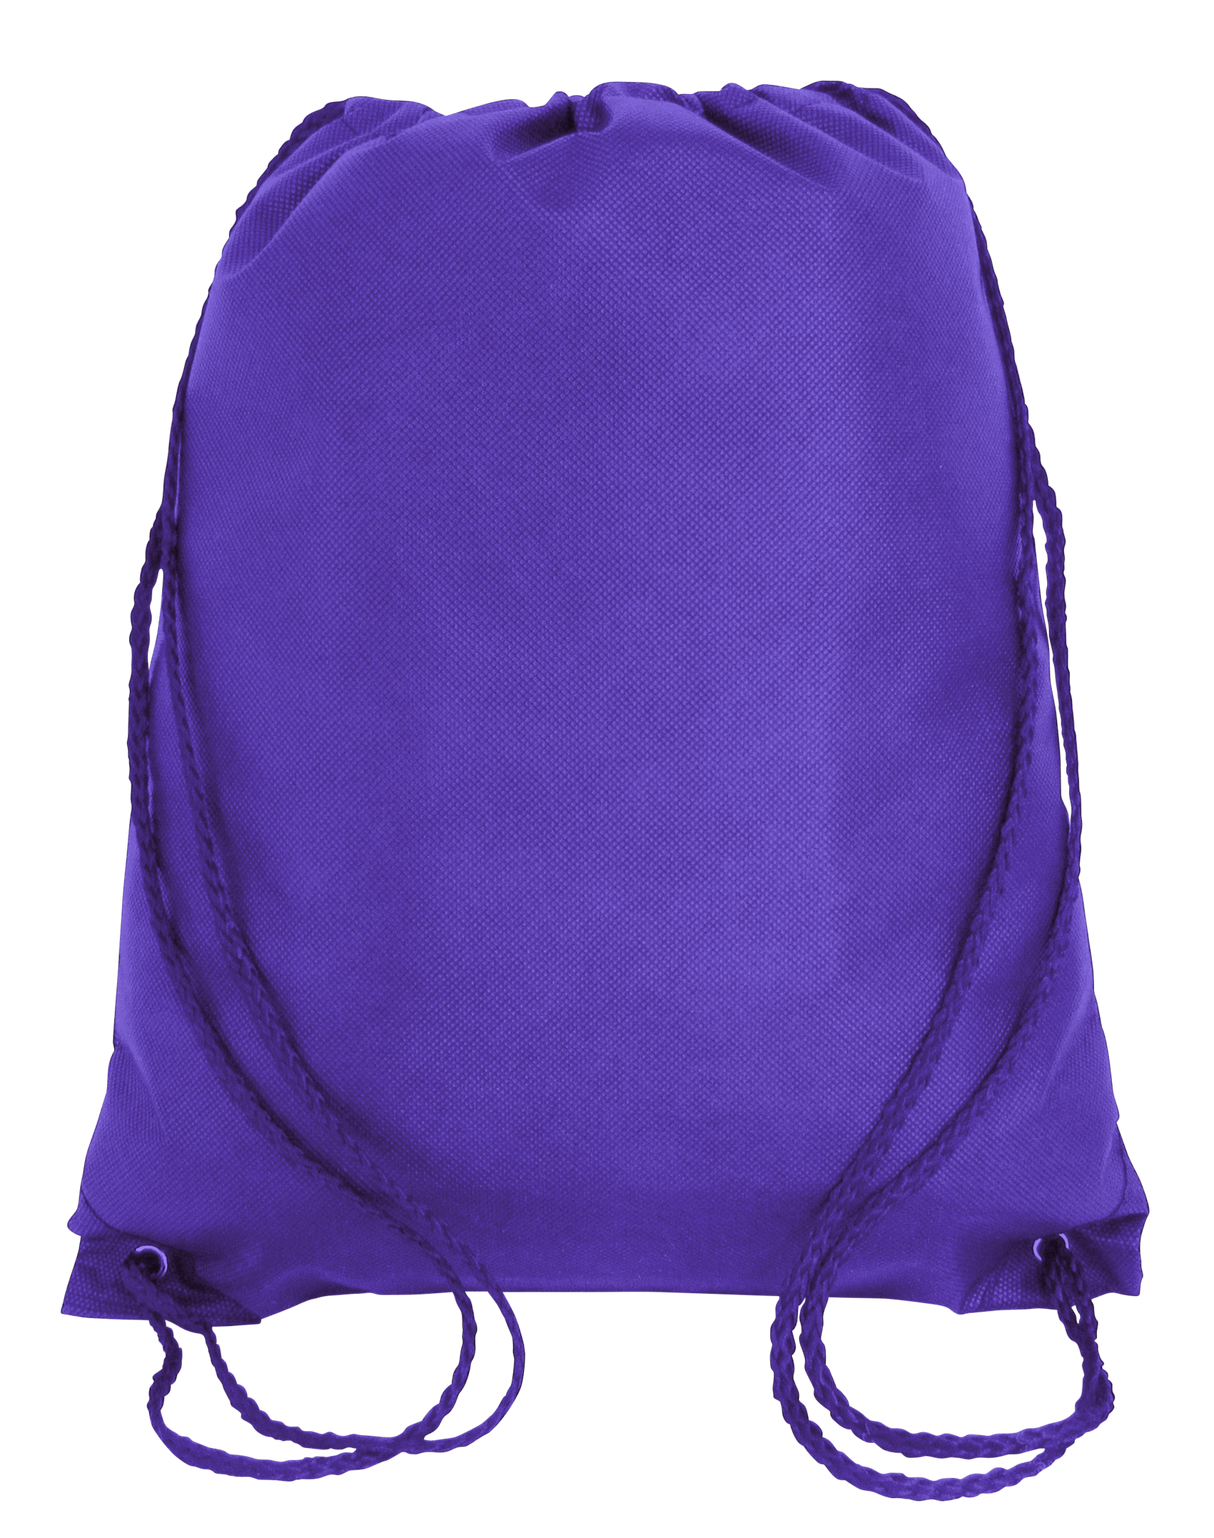 6 Features of Wholesale Drawstring Bags in Bulk